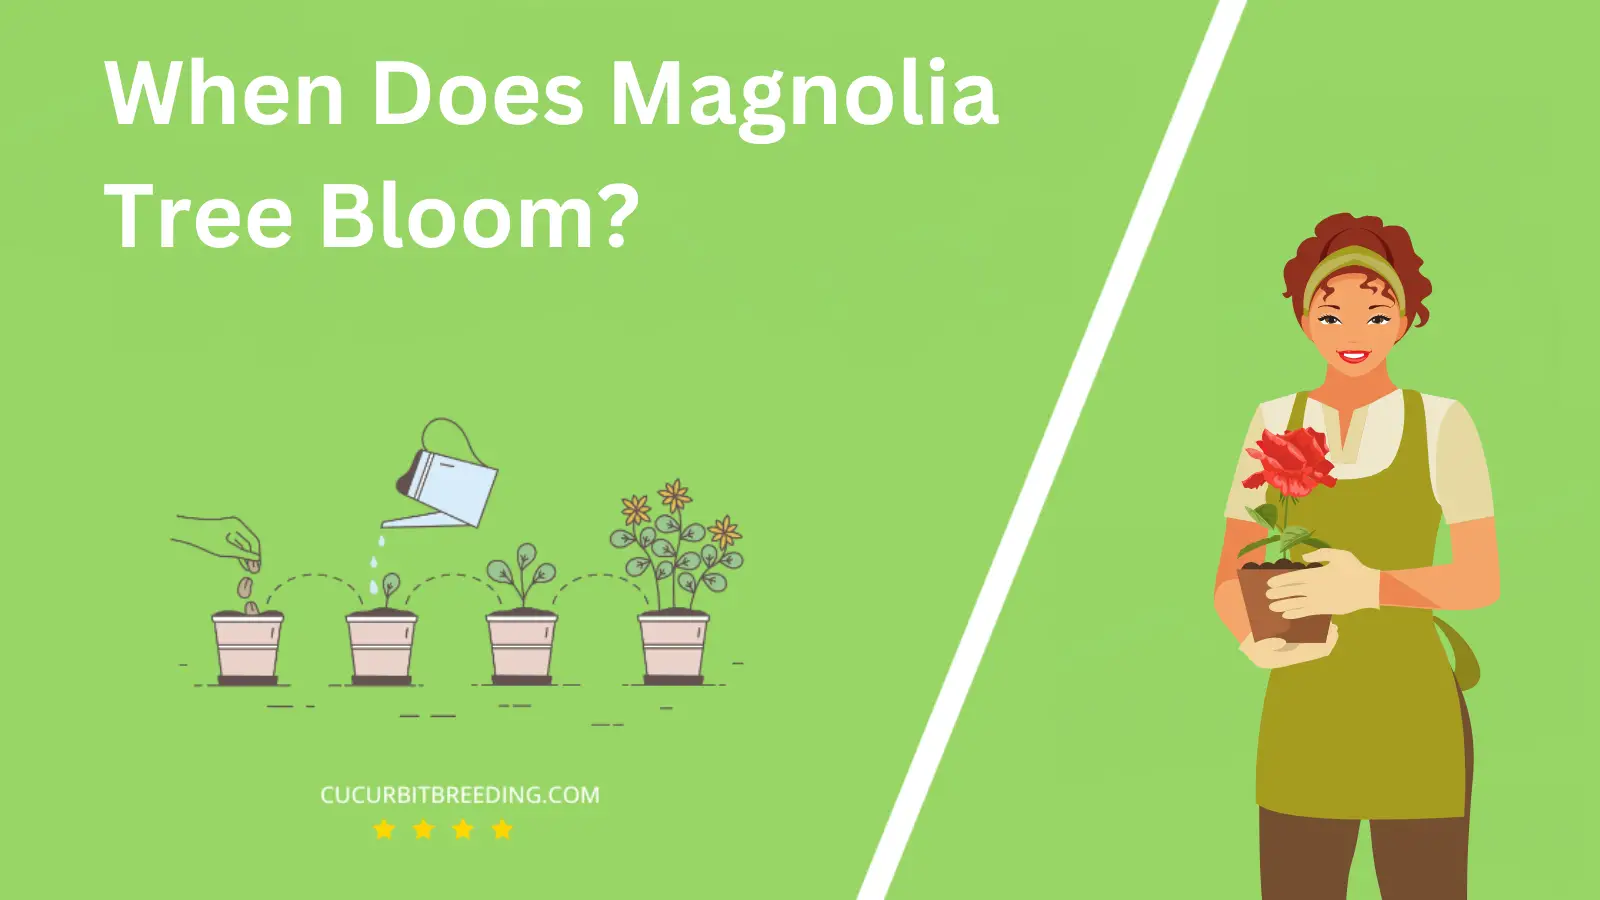 When Does Magnolia Tree Bloom?